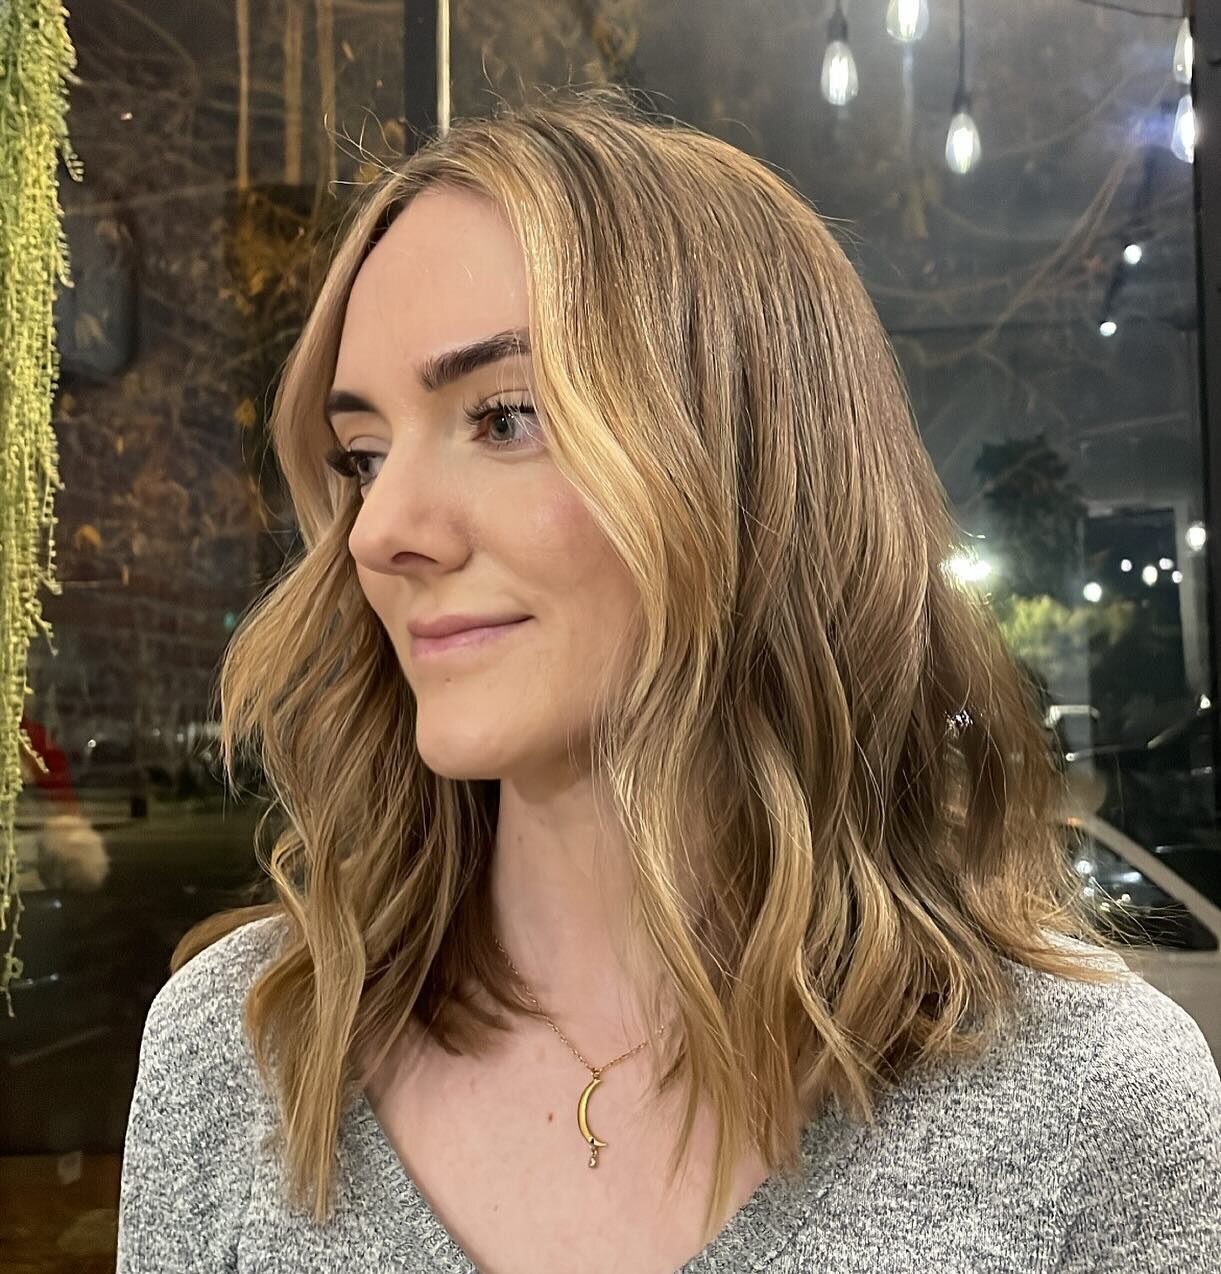 A big chop and some bright blondes✂️☀️ by @manesbyveronica
.
.
.
. 
.

#HairGoals #HairInspo #HairStyle #HairCare #HairLove #HairTrends #HairTransformation #HairMagic #HairFashion #HairJourney #HairEnvy #HairOnPoint #SalonLife #HairArt #HairGlam #Hea